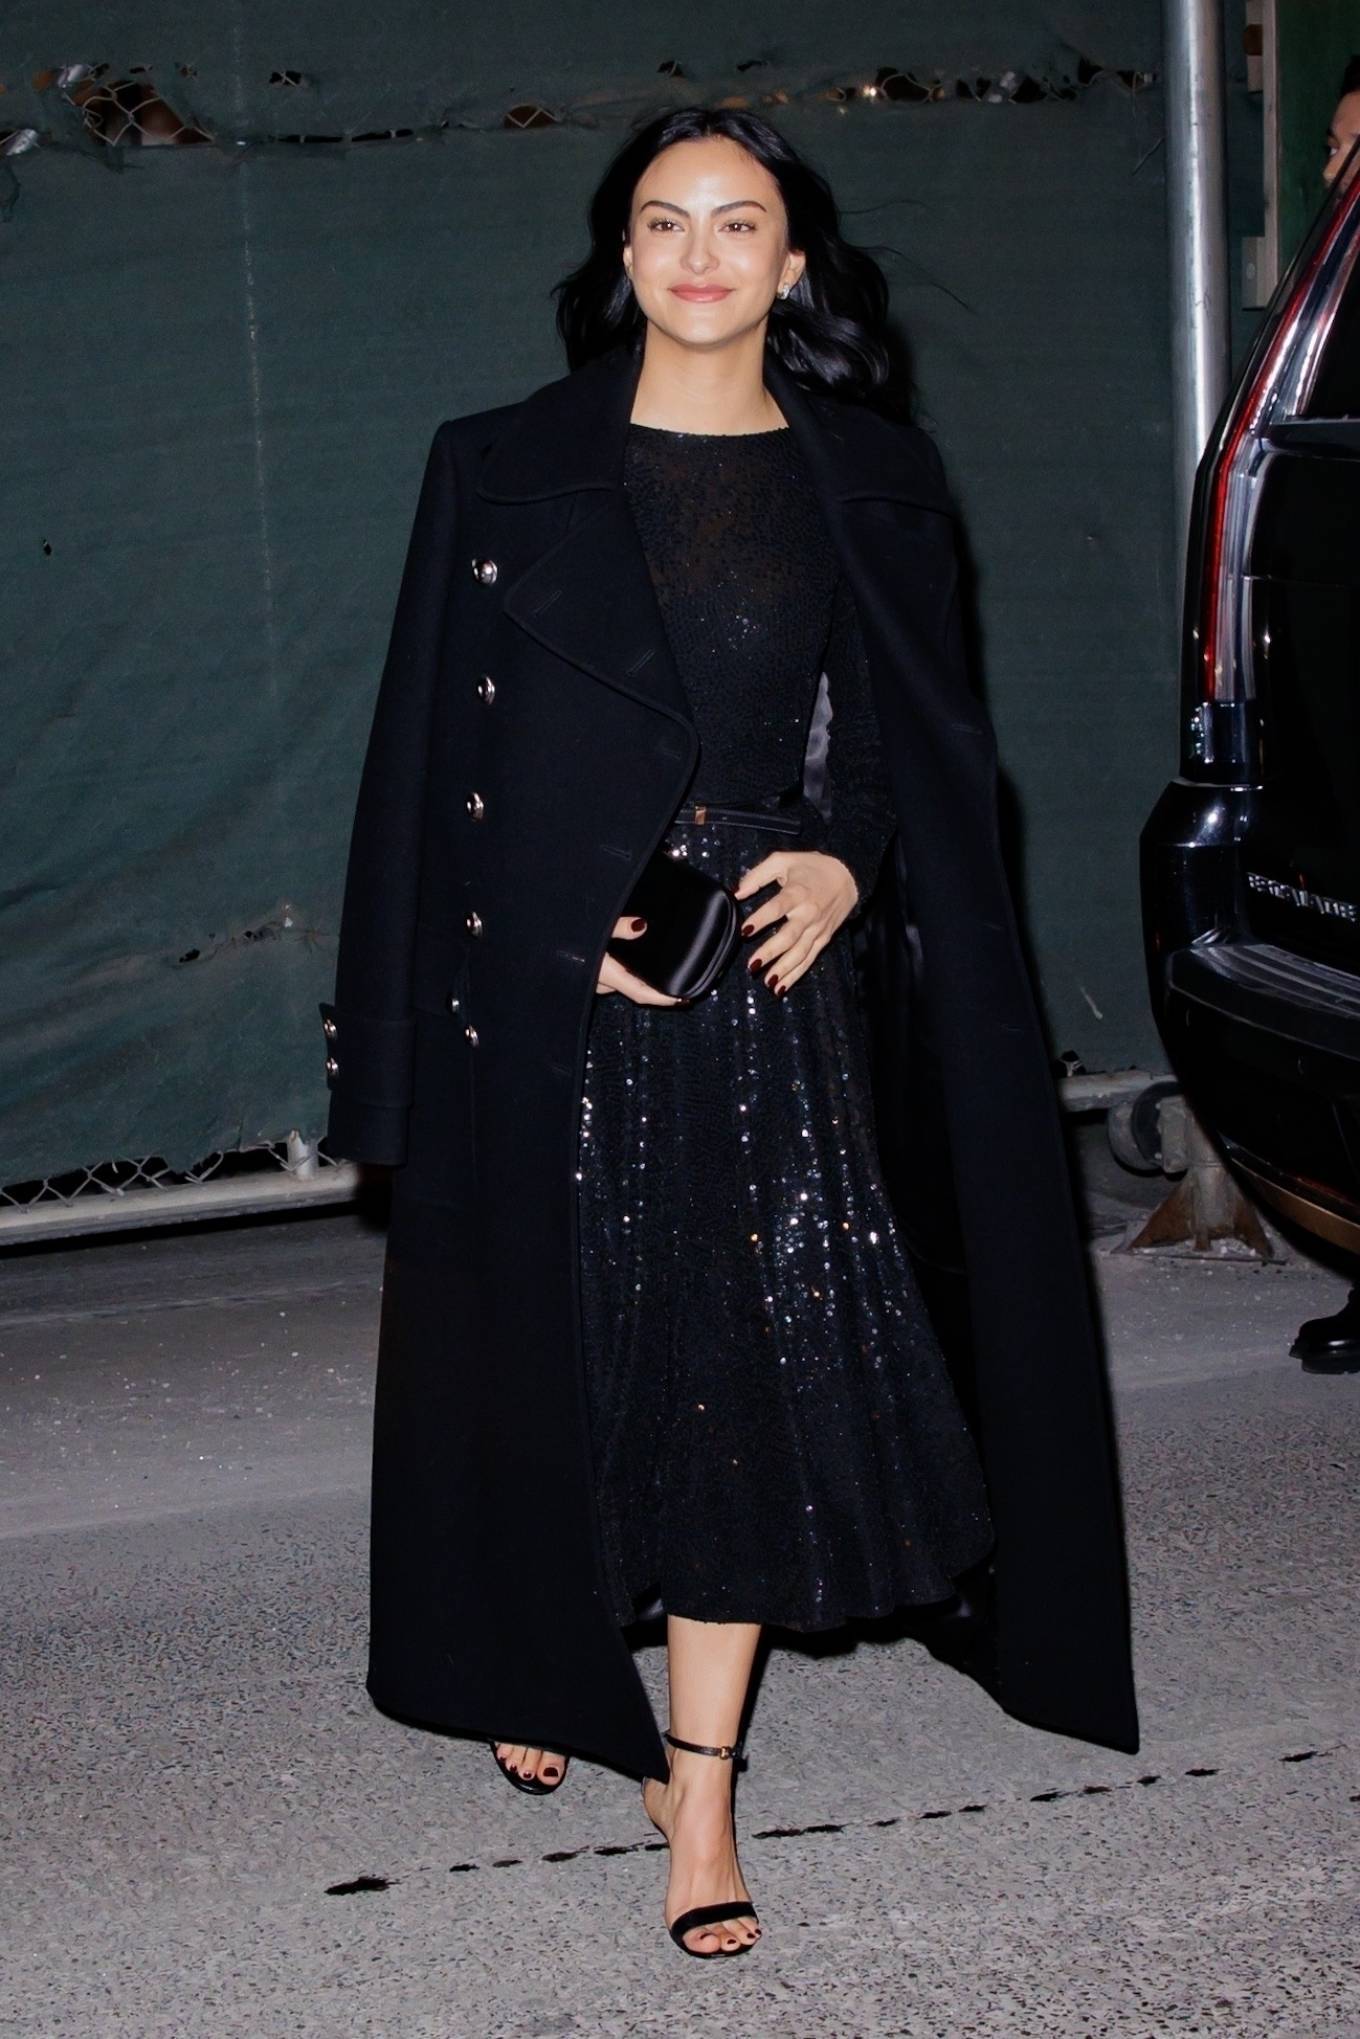 Camila Mendes 2022 : Camila Mendes – In all black arrives to the Michael Kors fashion show during NYFW-08